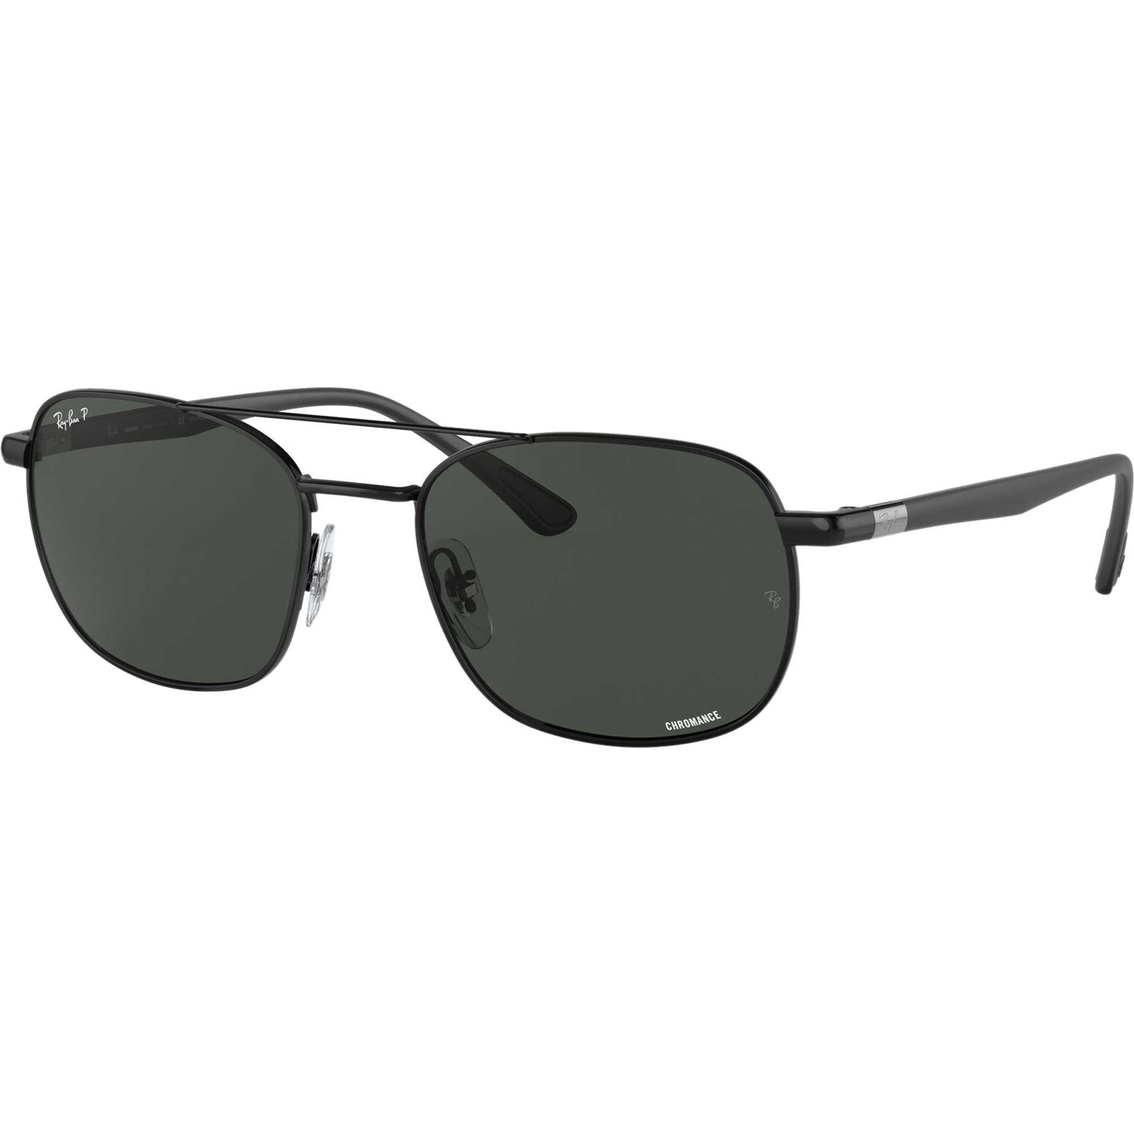 Ray-ban Square Sunglasses 0rb3670ch | Unisex Sunglasses | Clothing ...